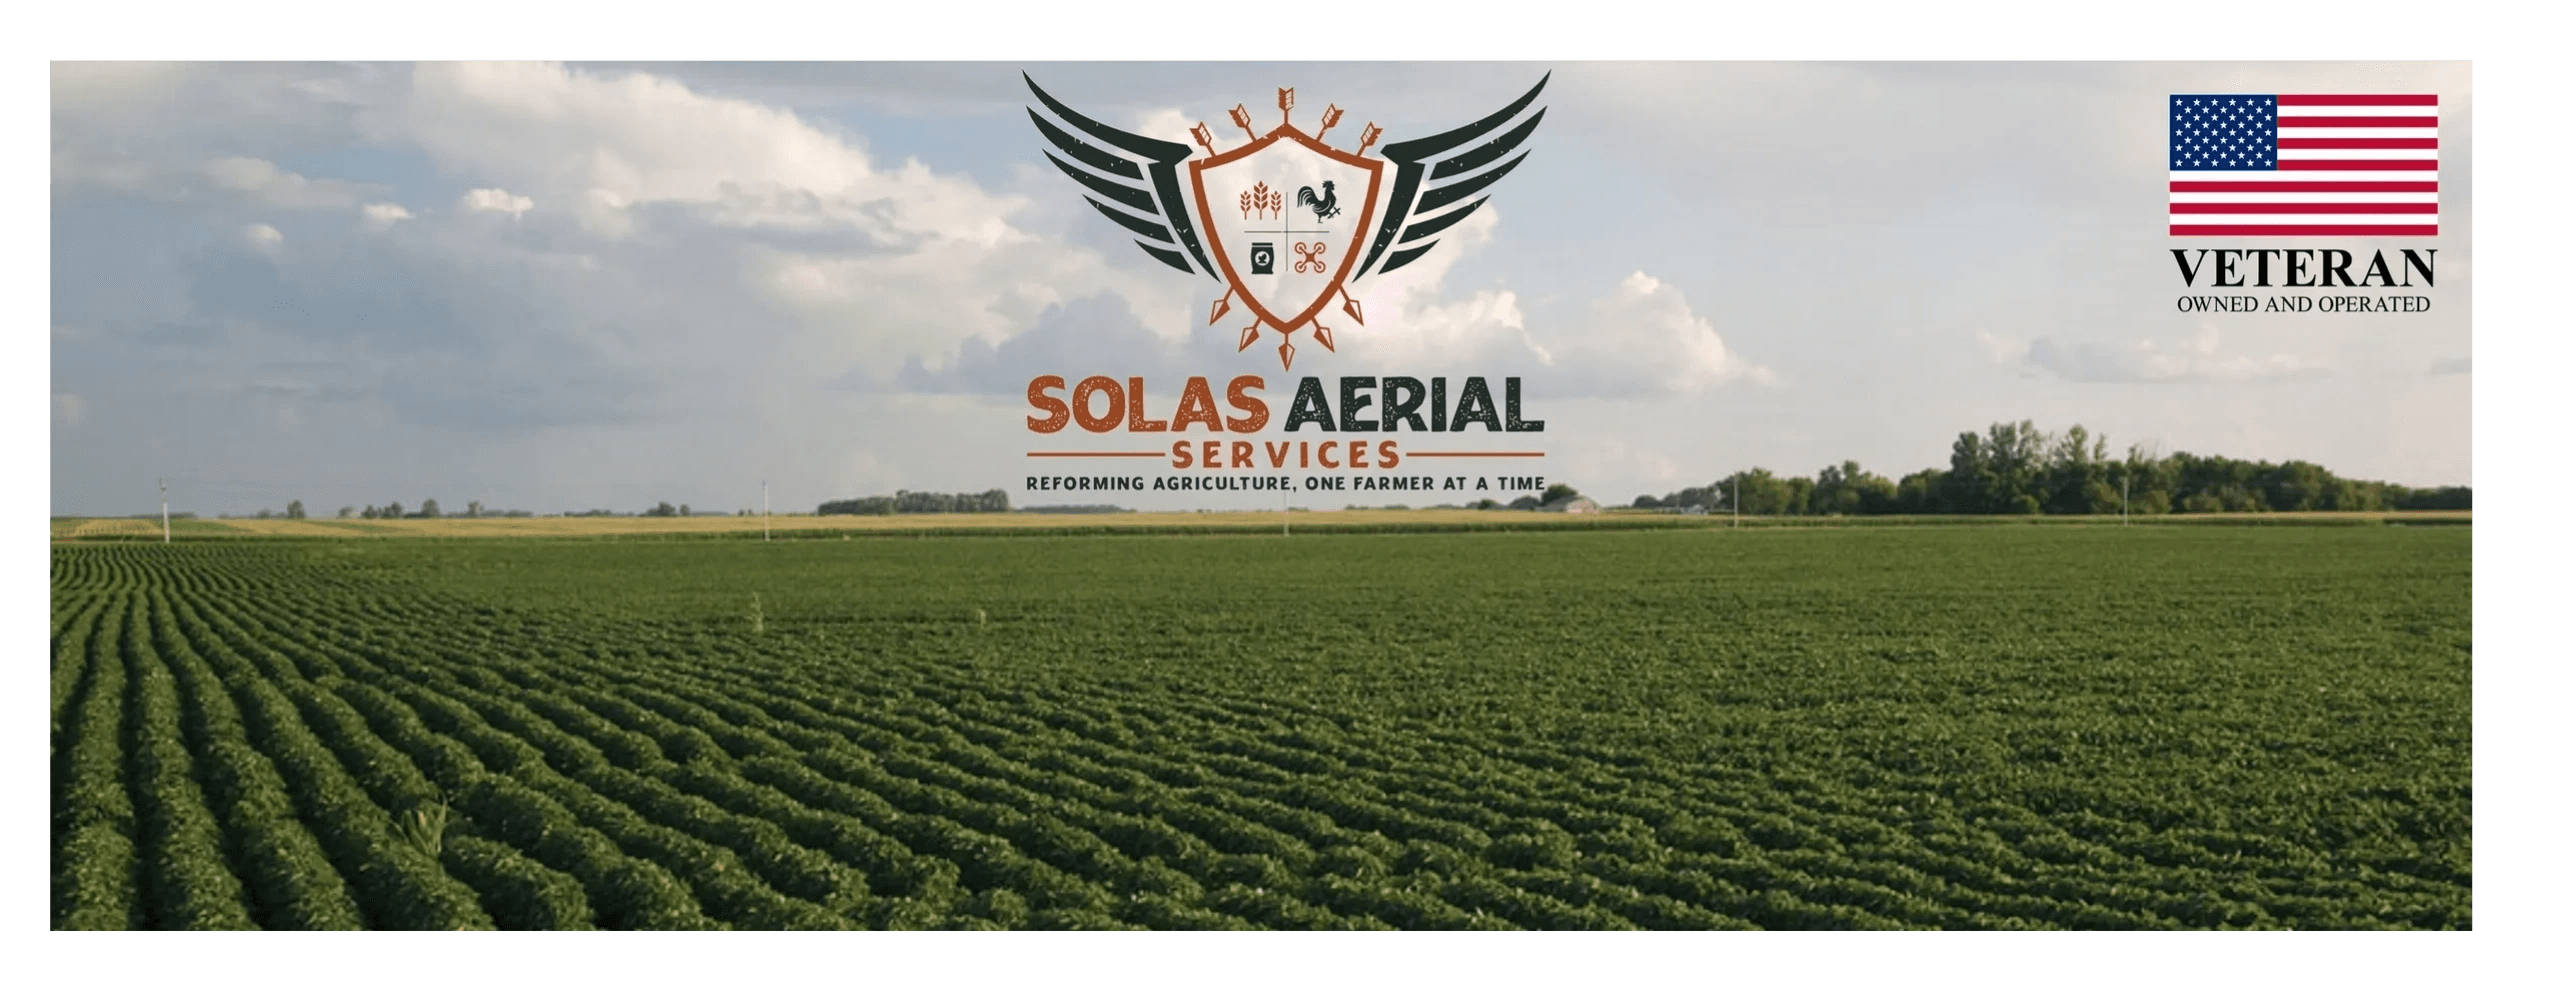 Product Solas Aerial Services LLC image